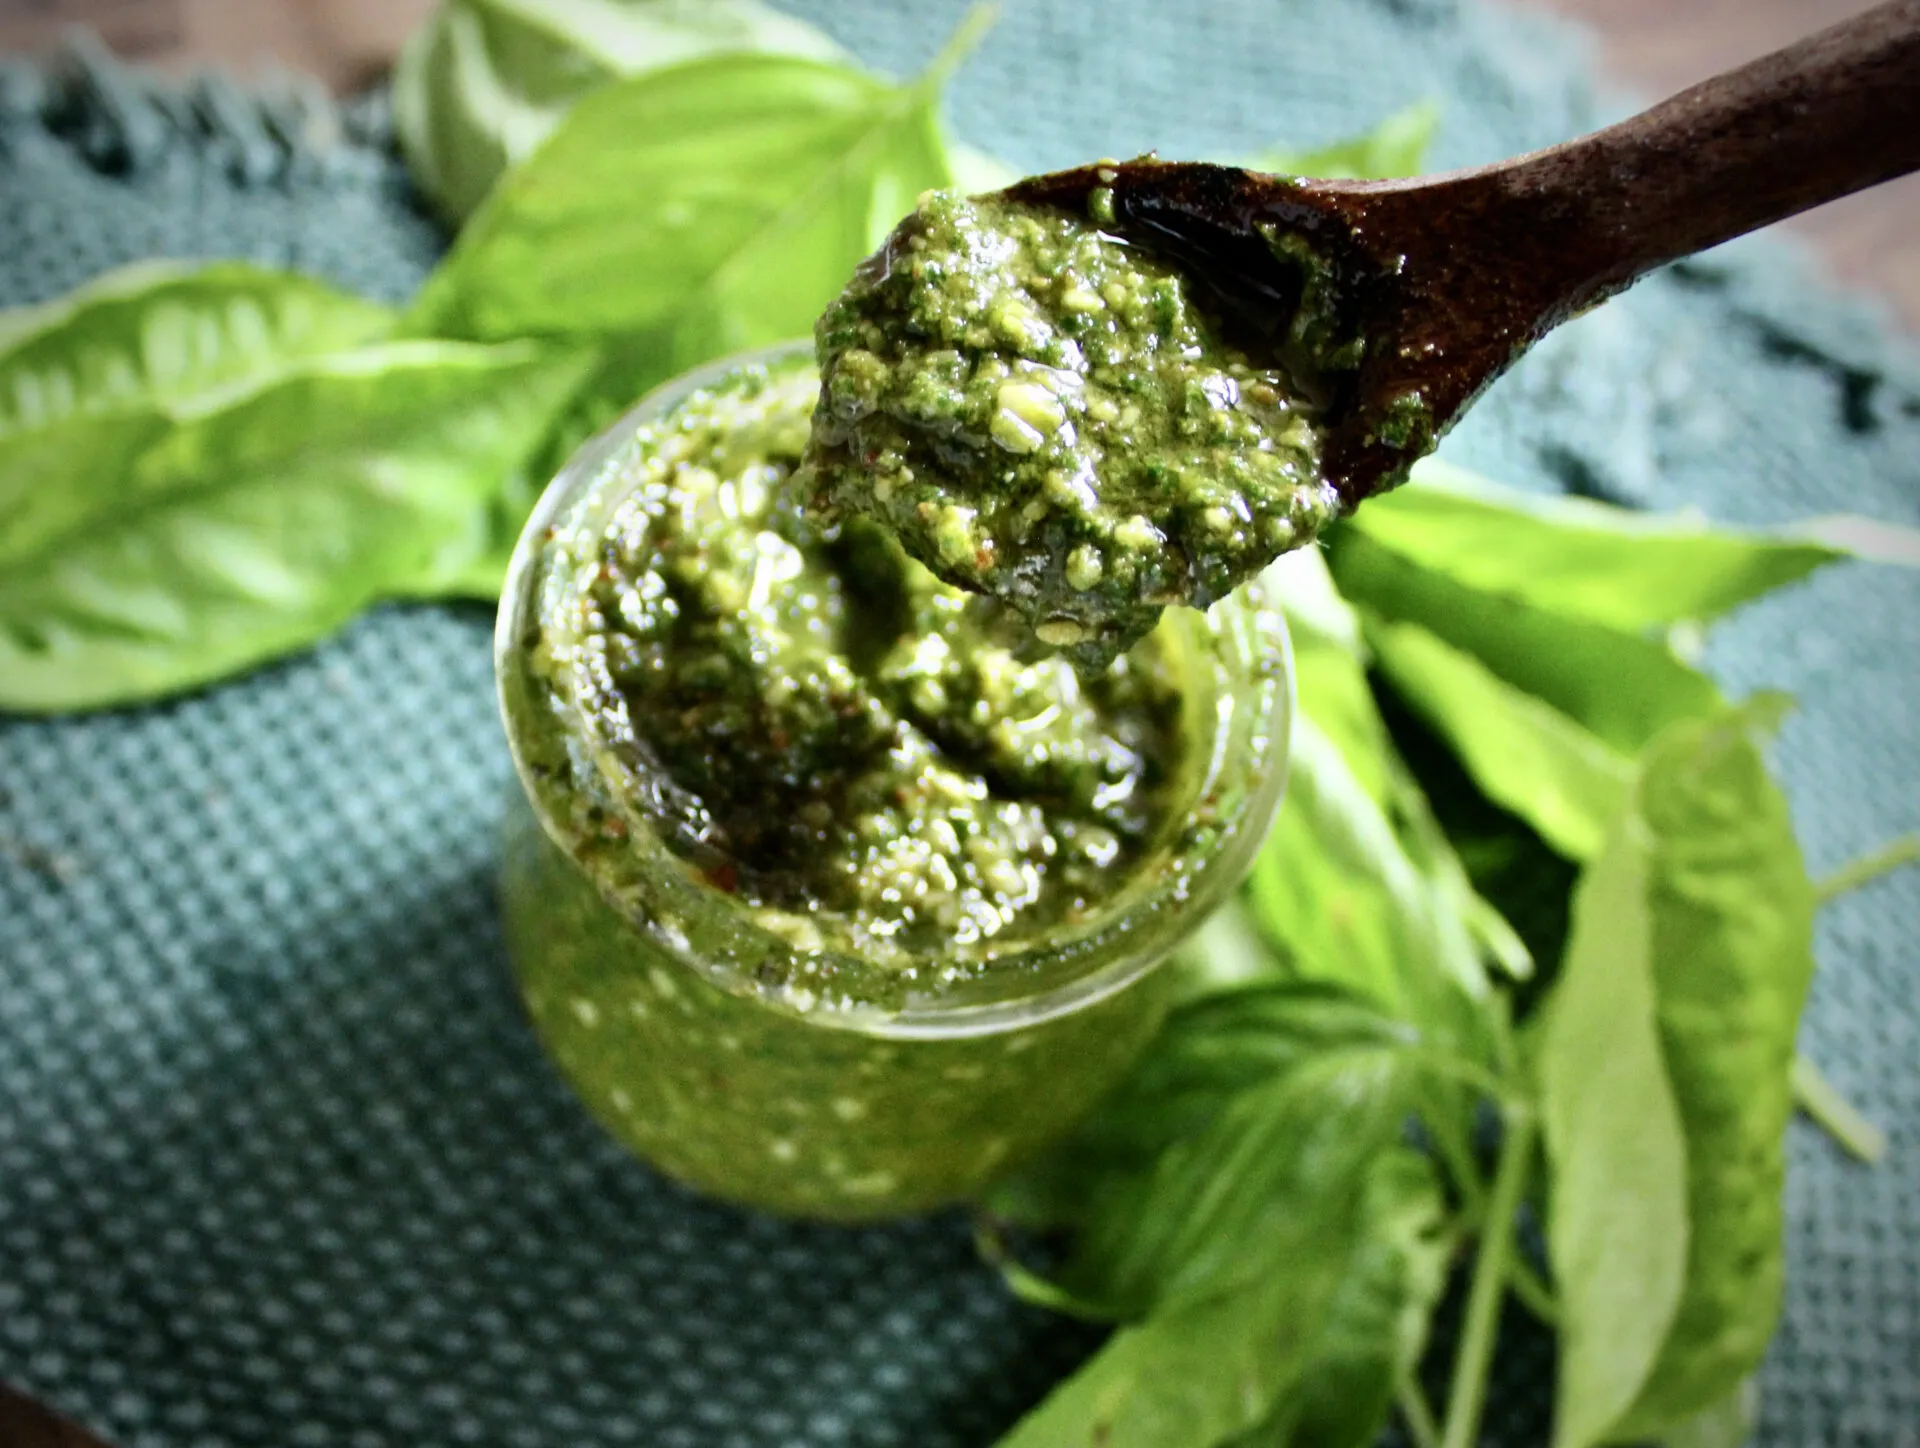 The perfect basil pesto recipe for your next weeknight pasta dinner! Super easy and ready in less than 5 minutes.